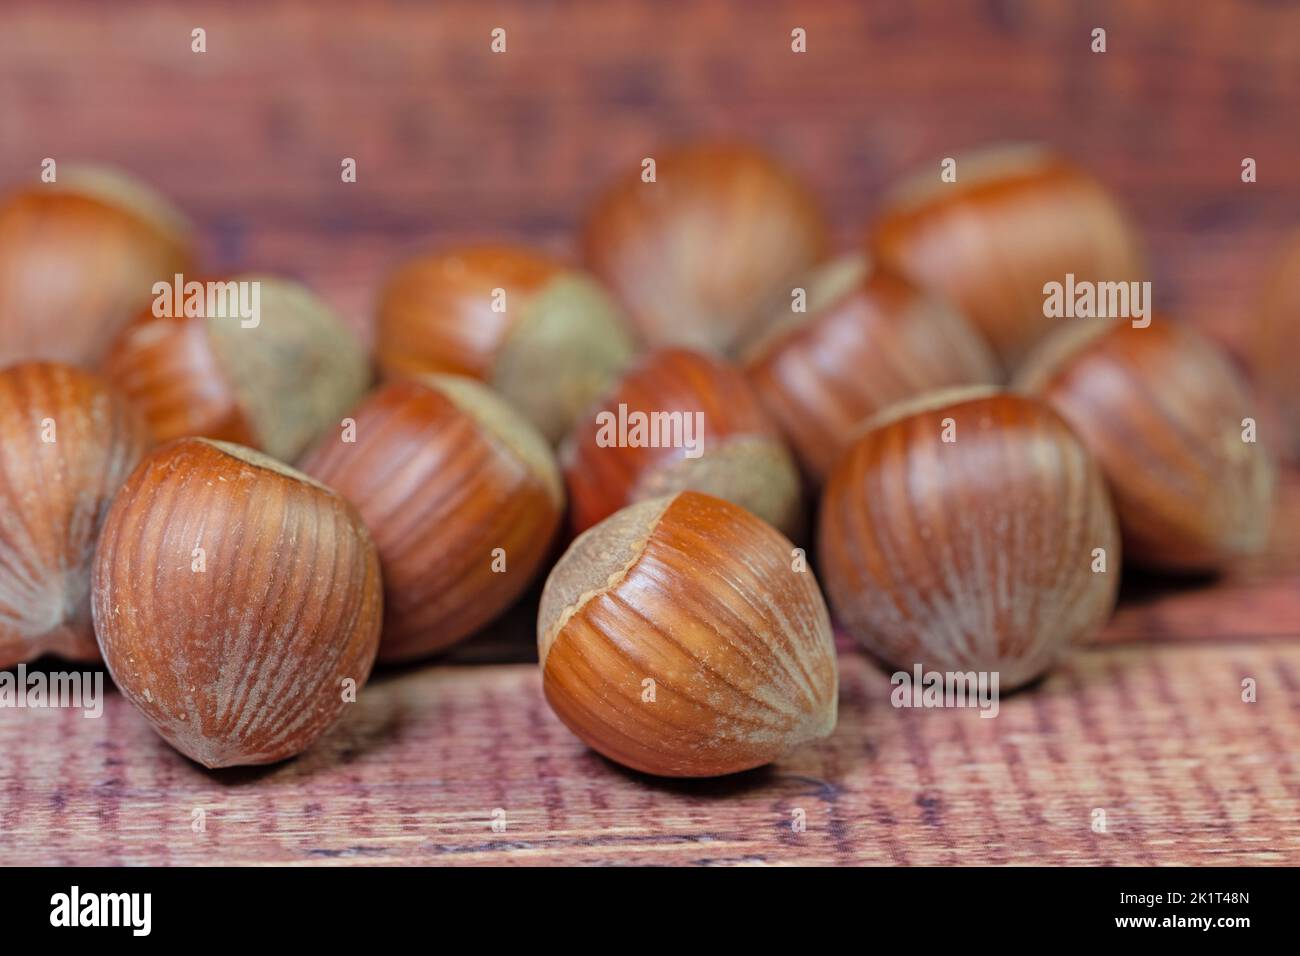 Hazelnuts in a close up Stock Photo